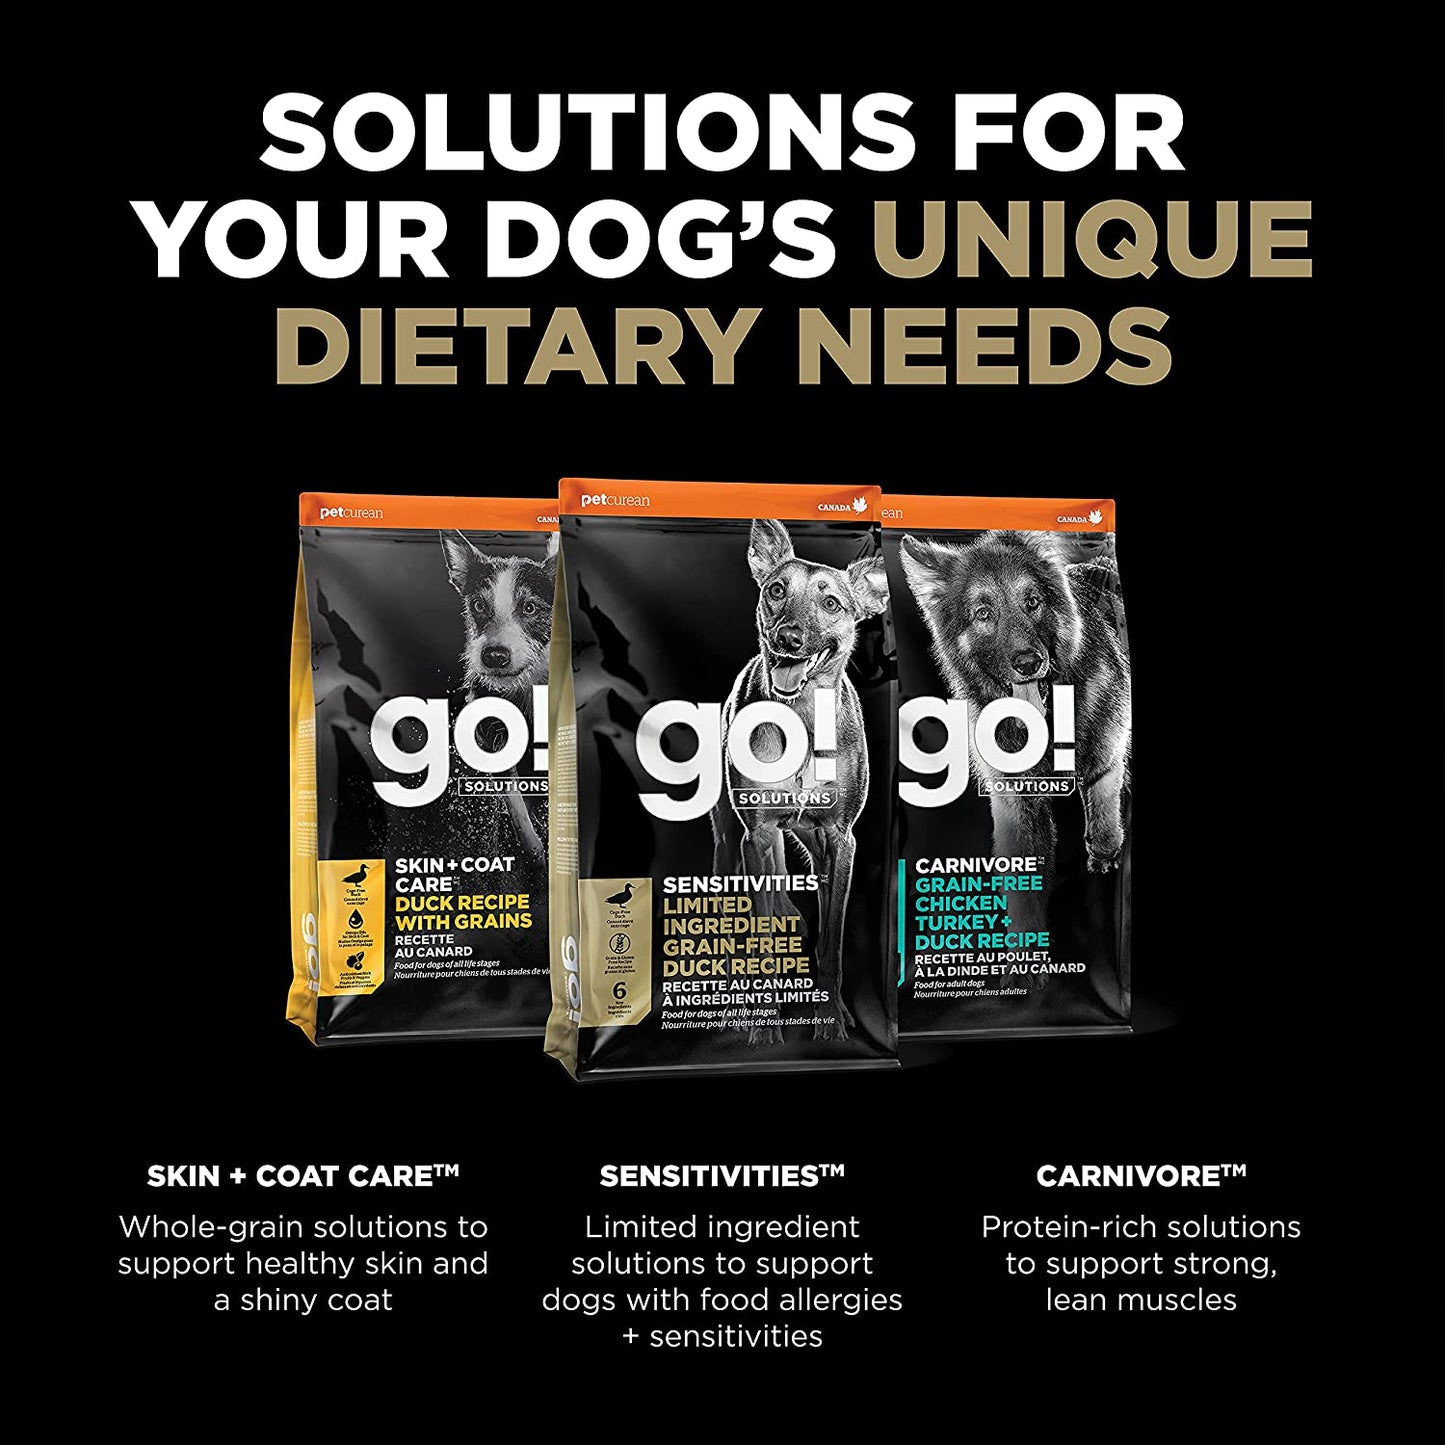 GO! SENSITIVITIES Limited Ingredient Grain Free Duck recipe for dogs  Dog Food  | PetMax Canada